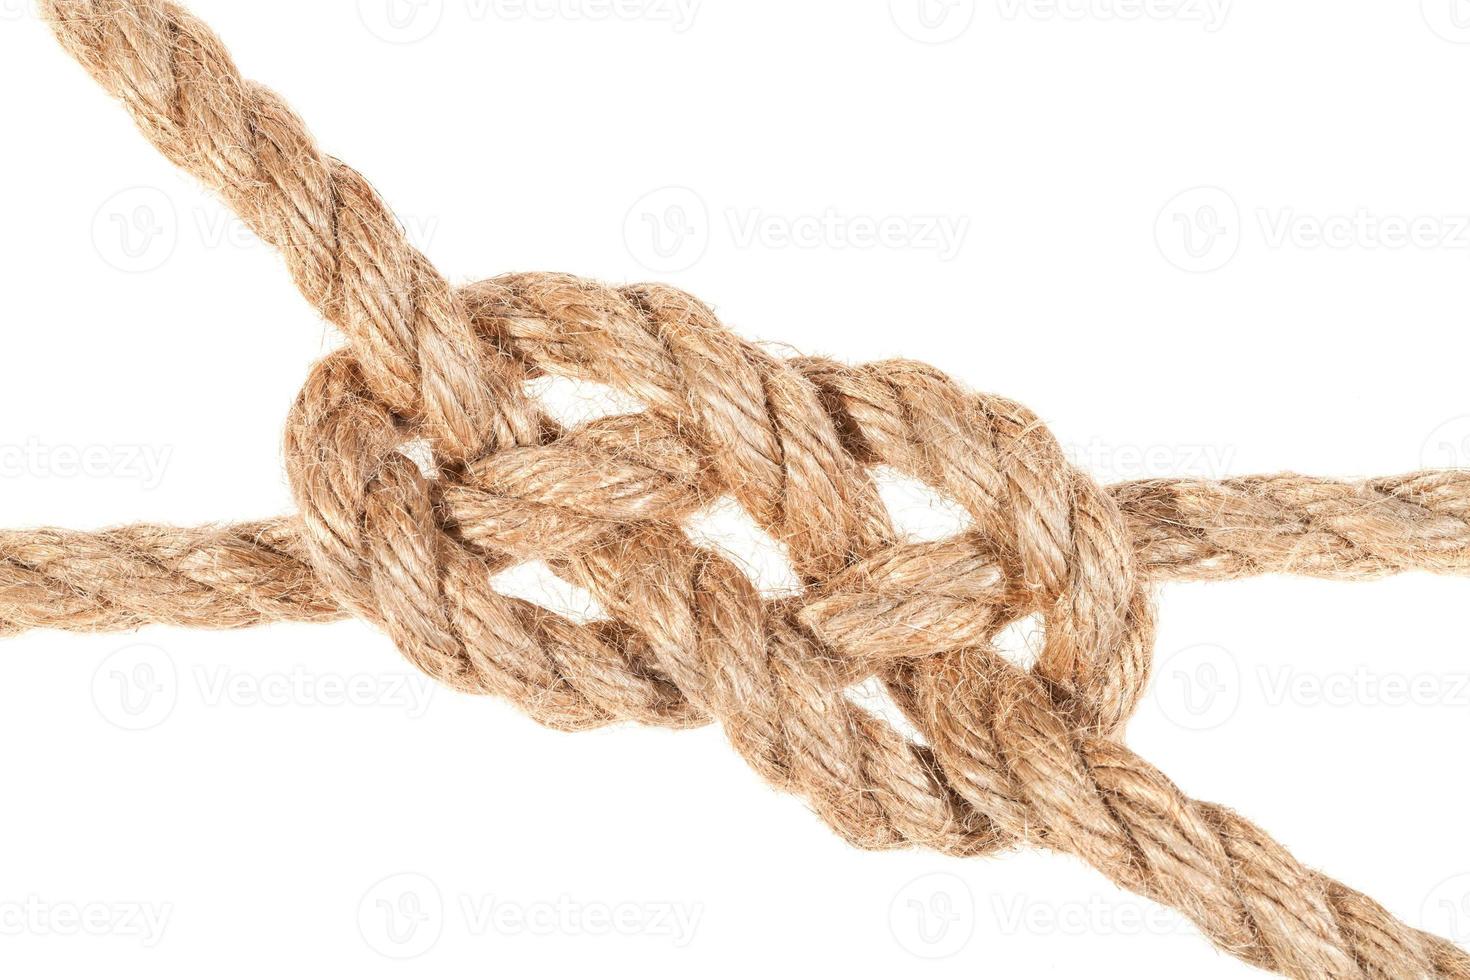 carrick bend knot joining two ropes close up photo